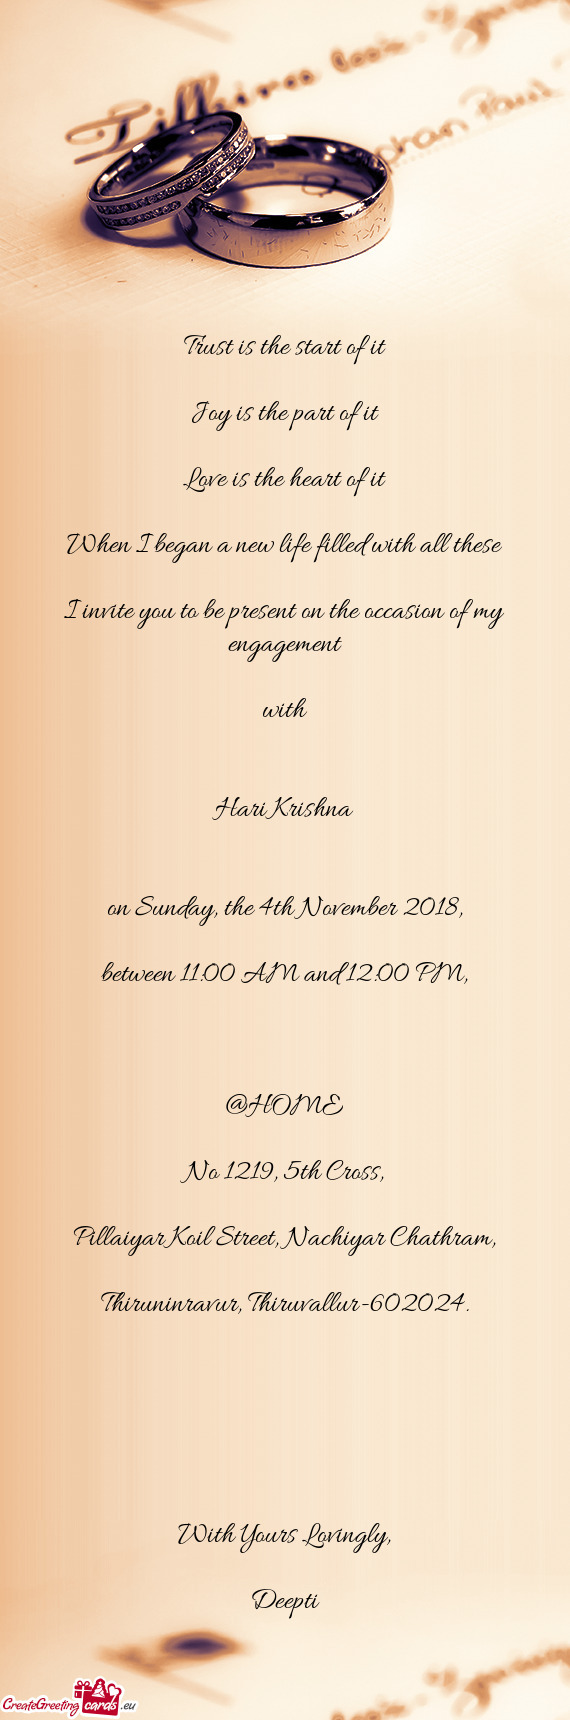 I invite you to be present on the occasion of my engagement